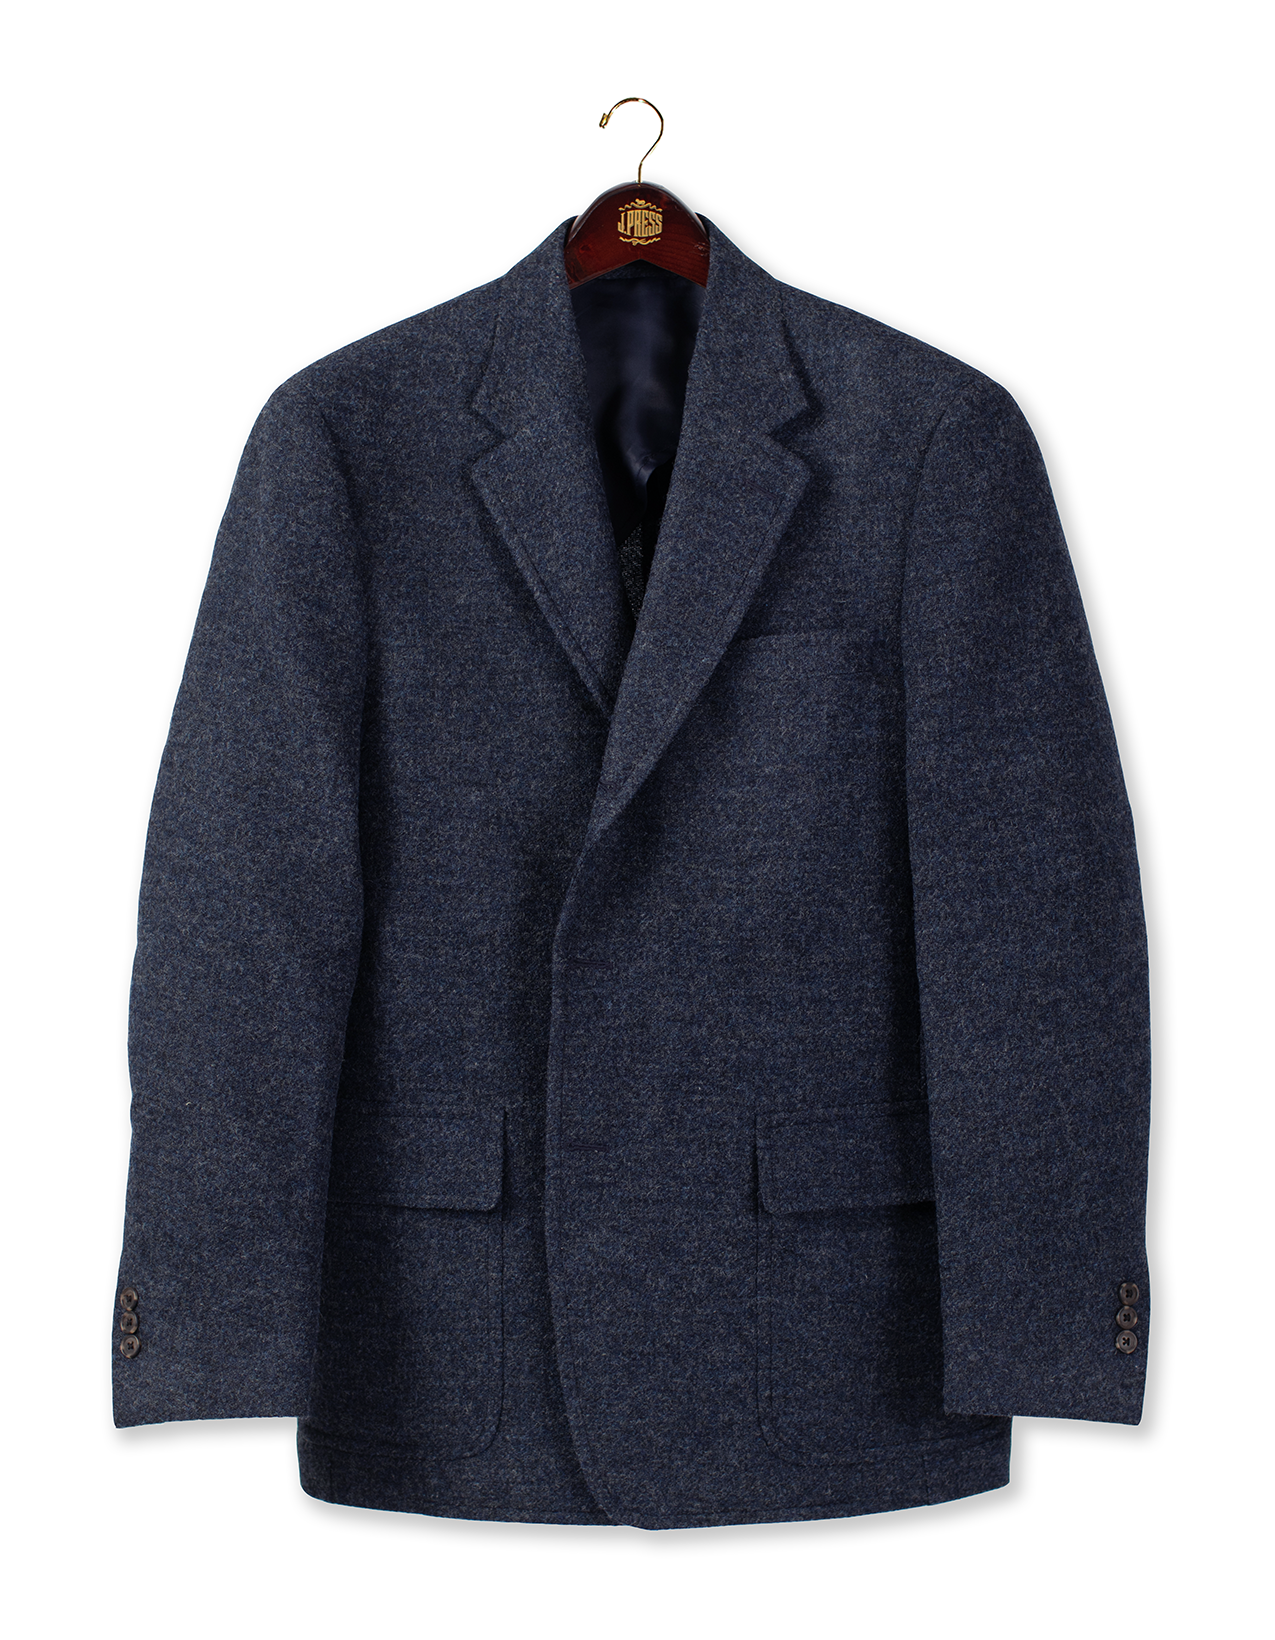 SHAGGY DOG SPORT COAT IN BLUE SOLID - MTO